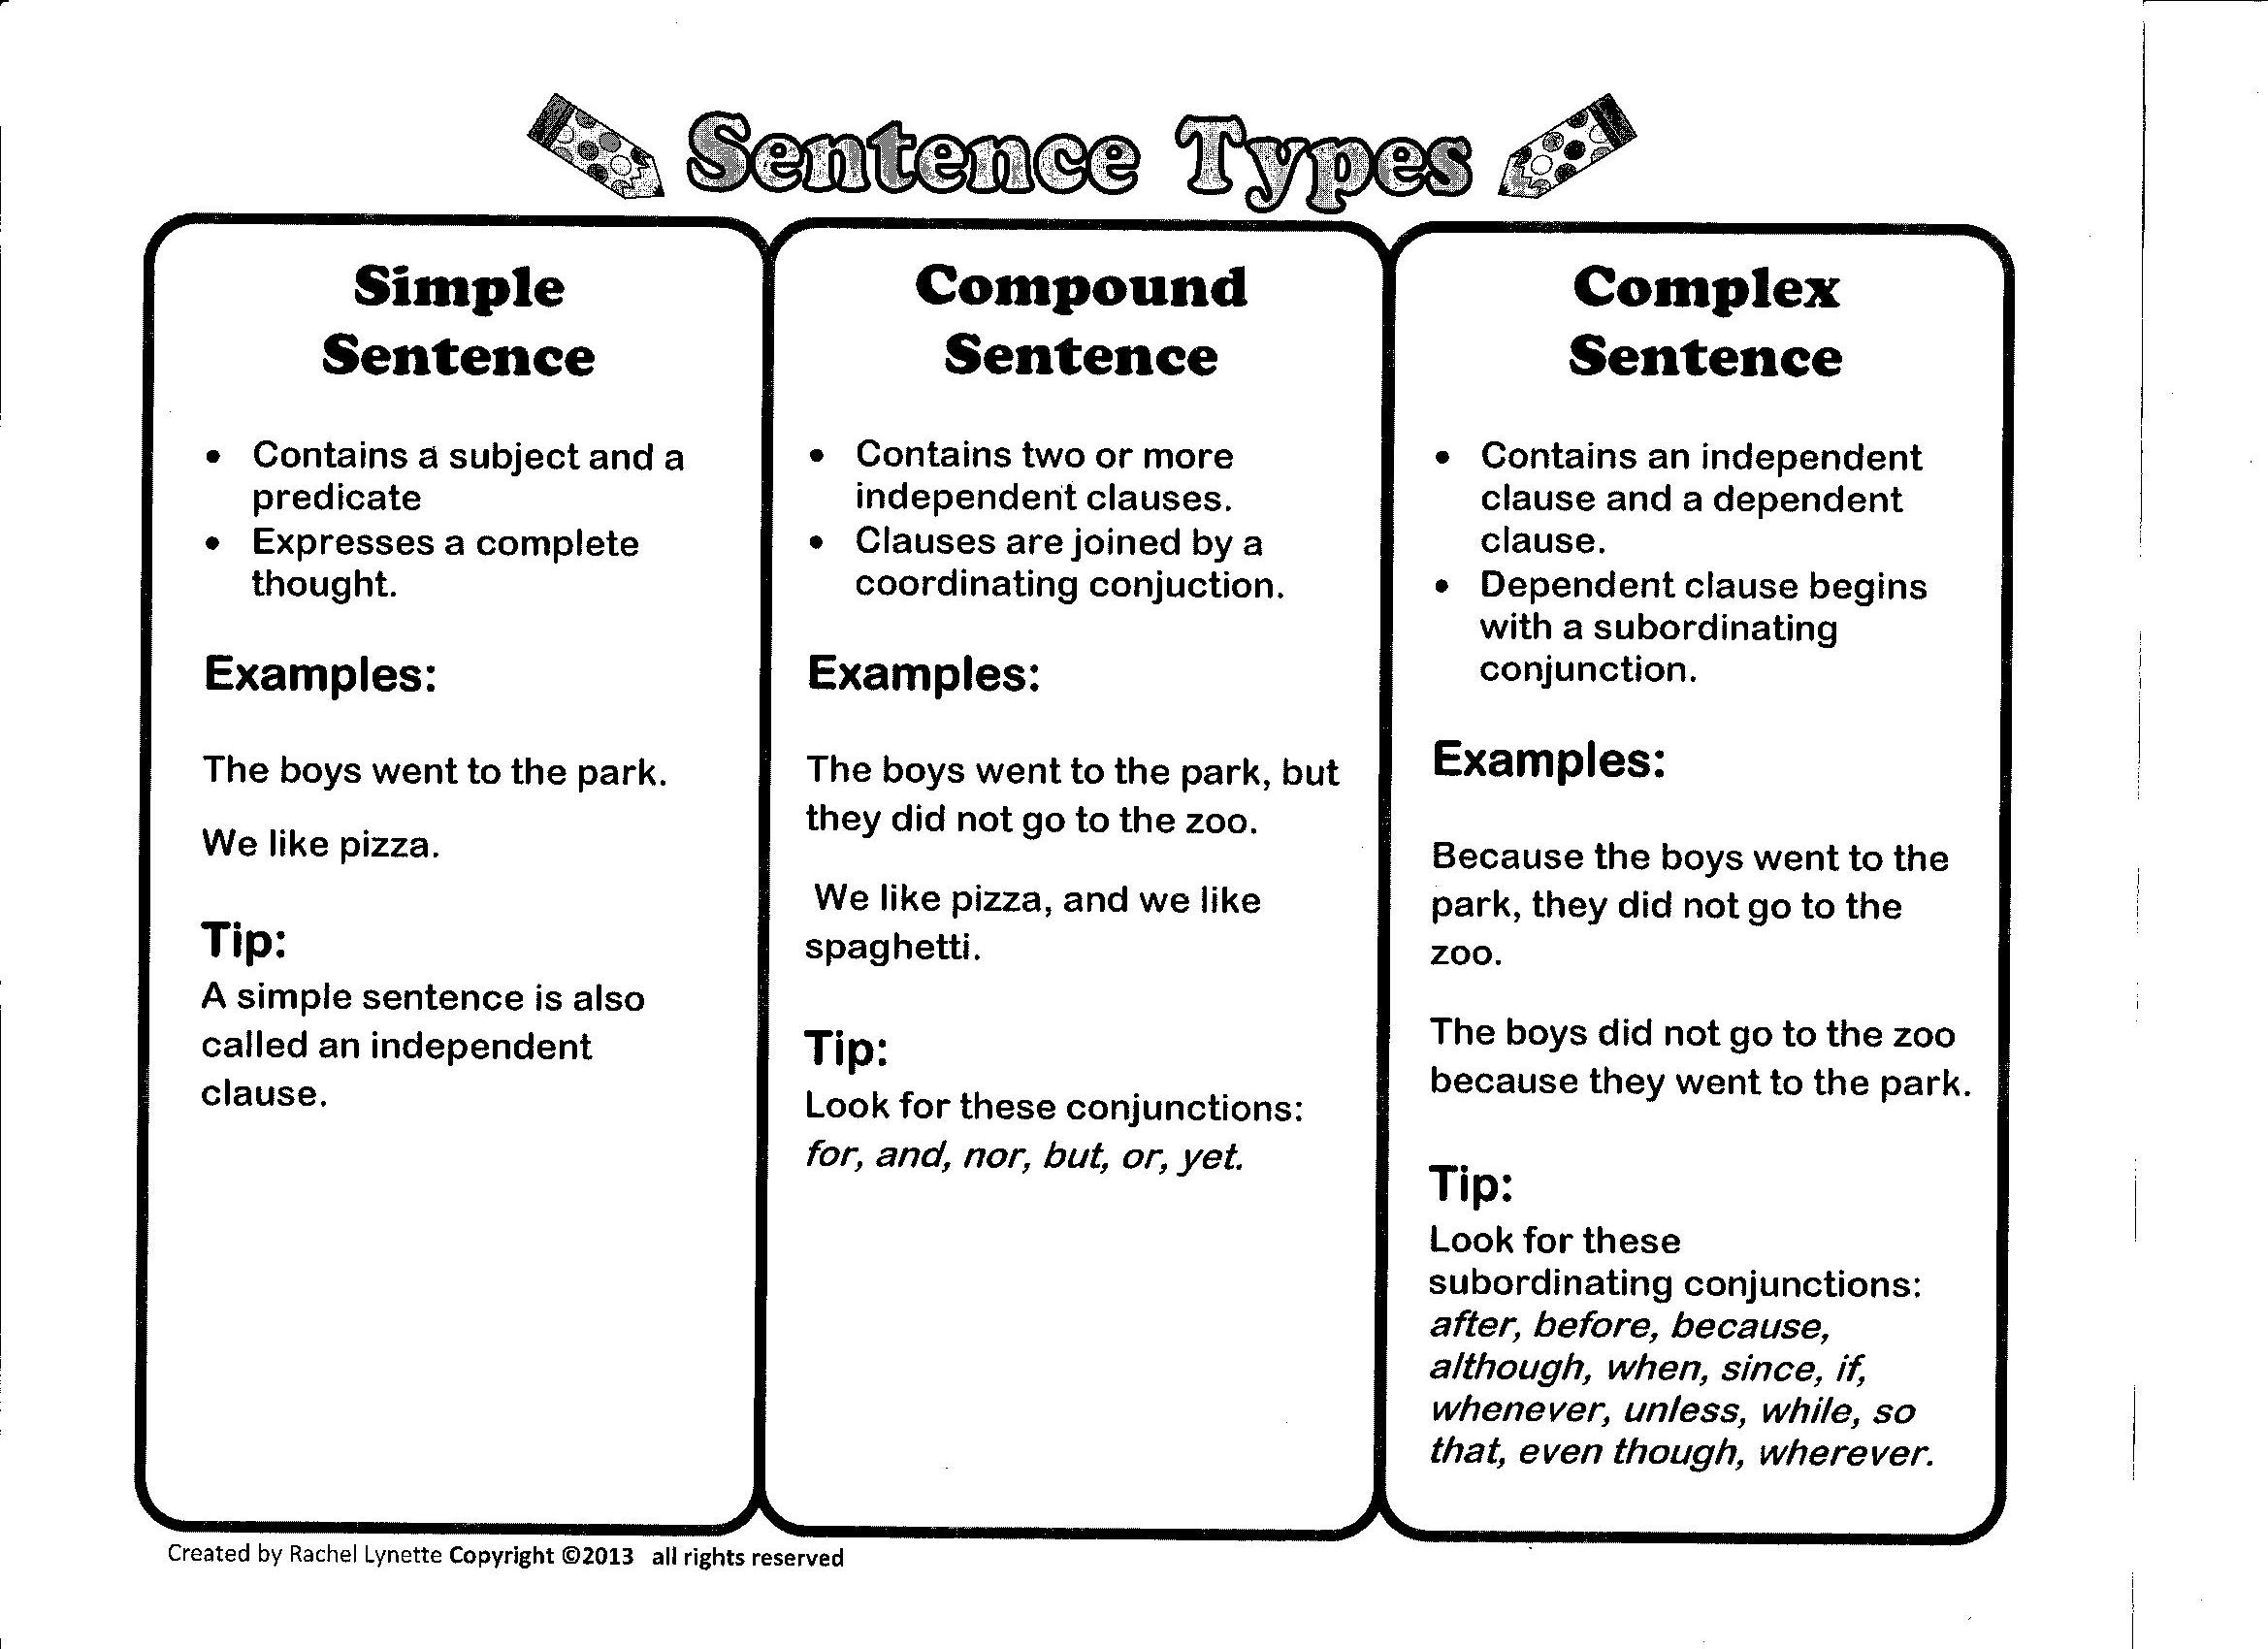 13 Best Images Of Simple And Compound Sentences Worksheets Simple Compound Complex Sentence